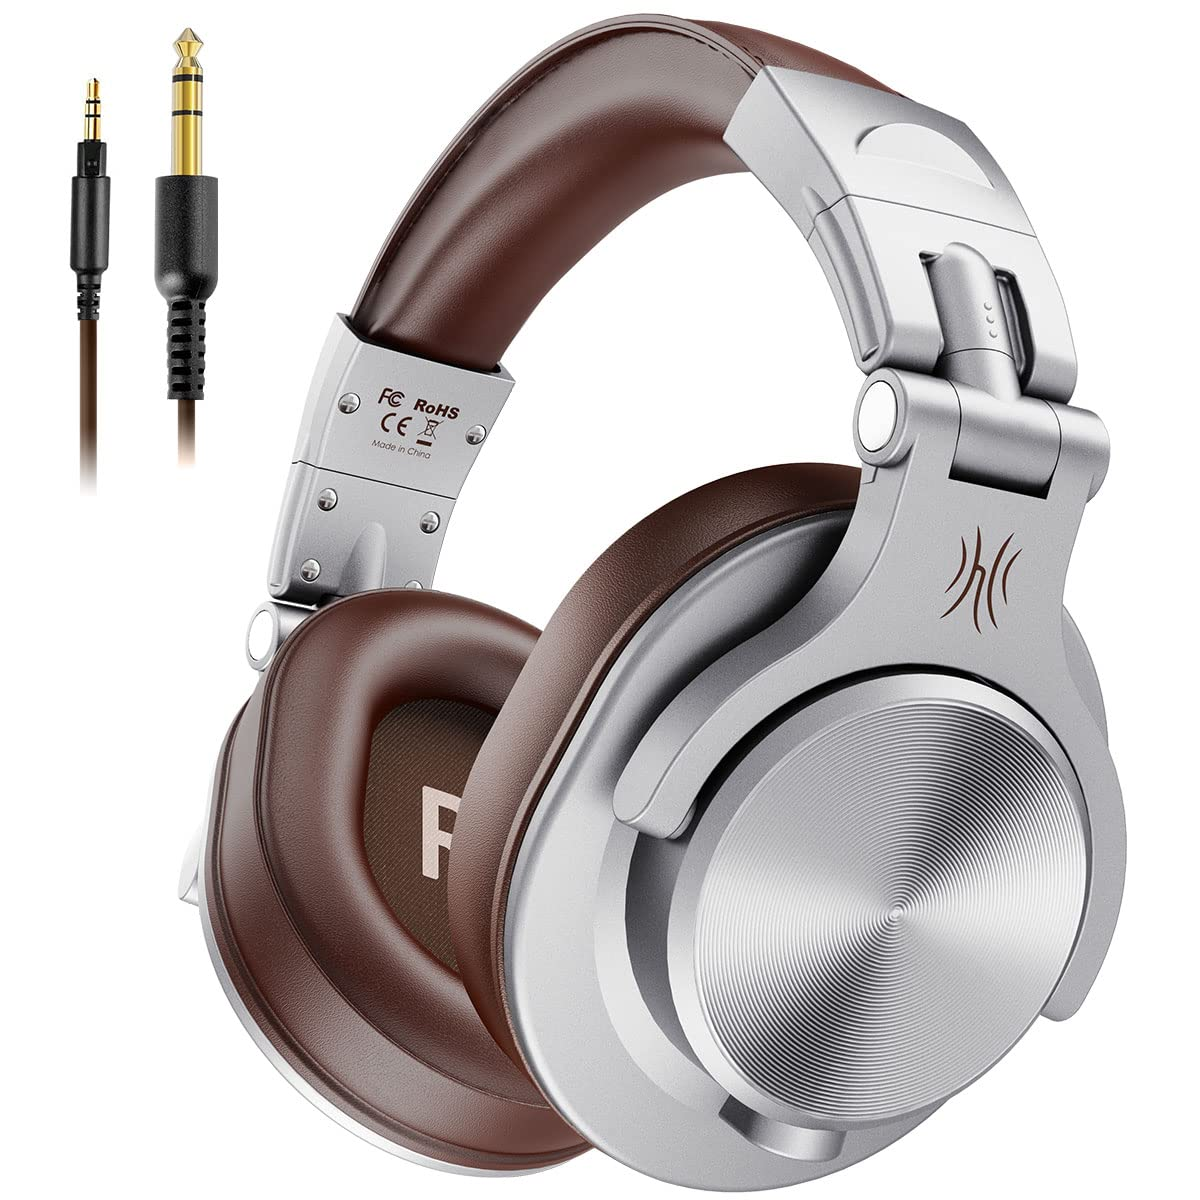 Over-ear ONEODIO A71, Silber headsets